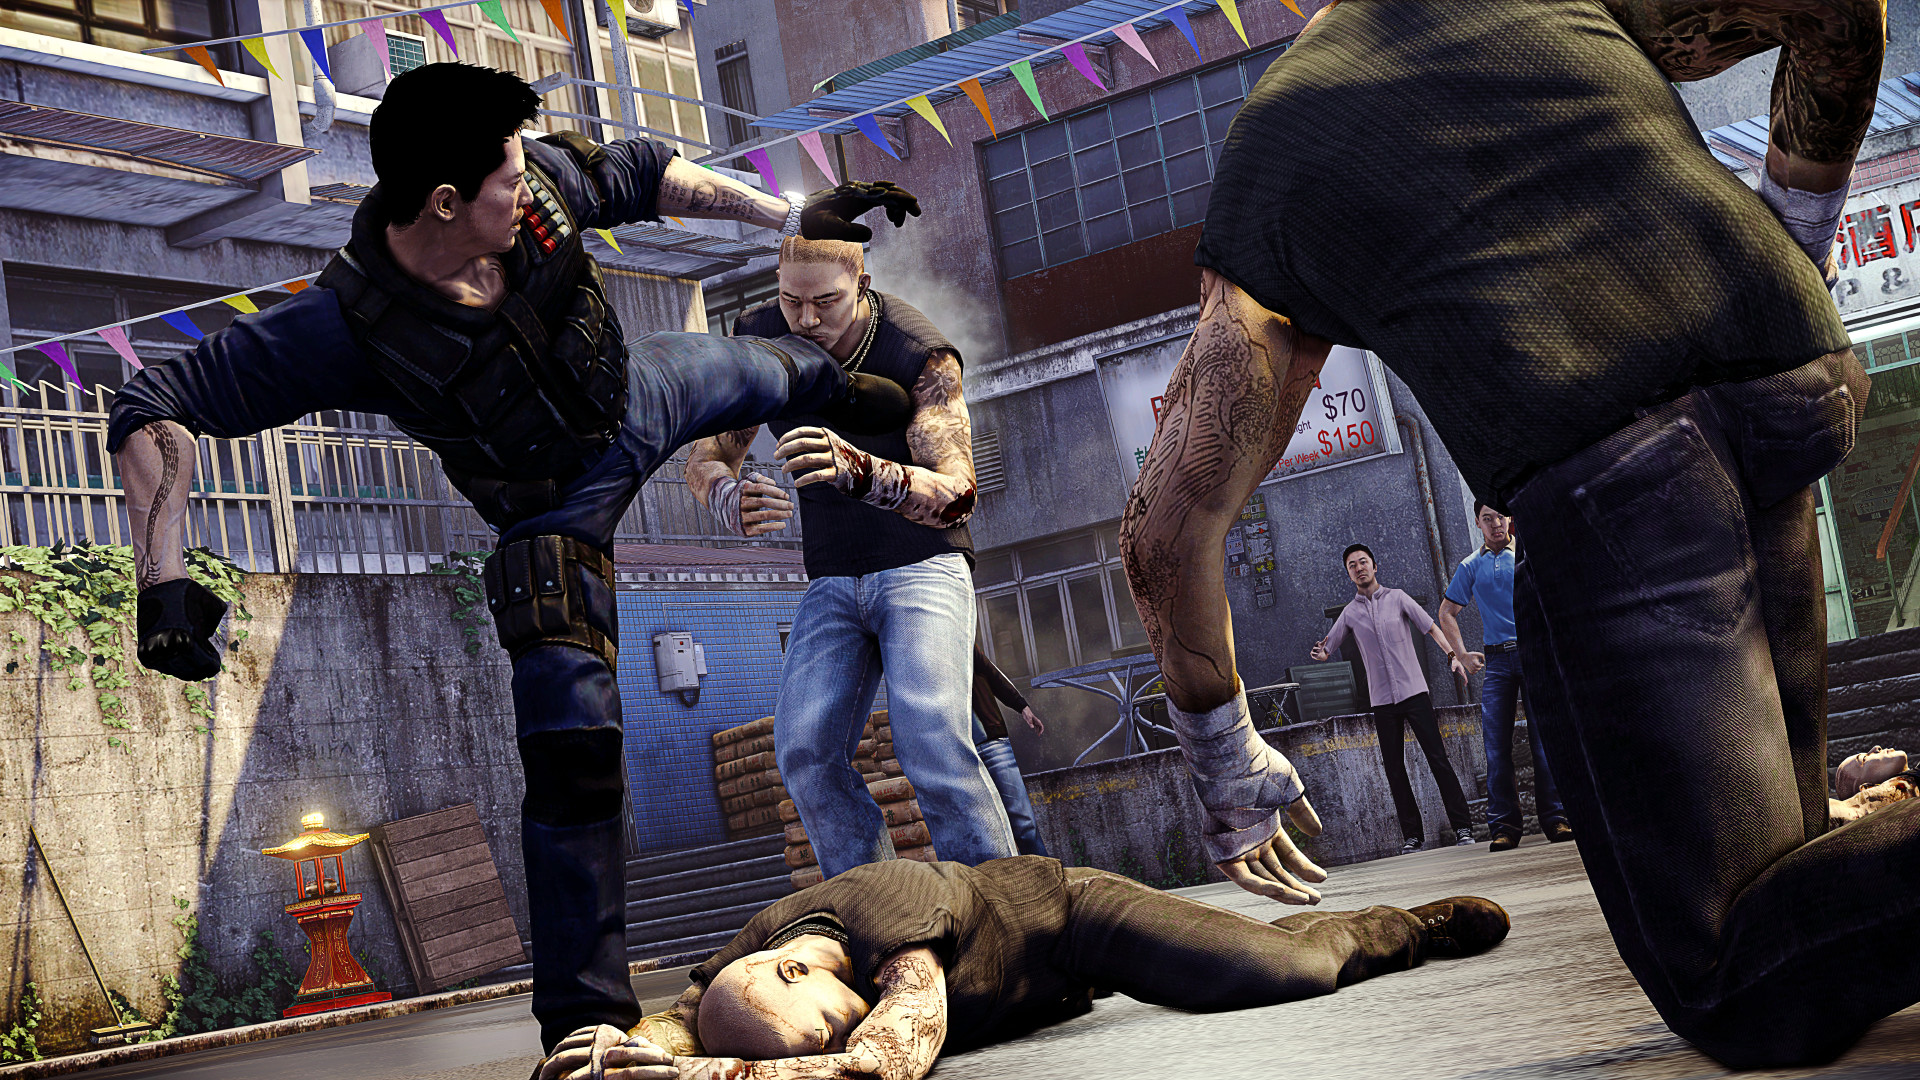 sleeping dogs definitive edition pc all outfits save